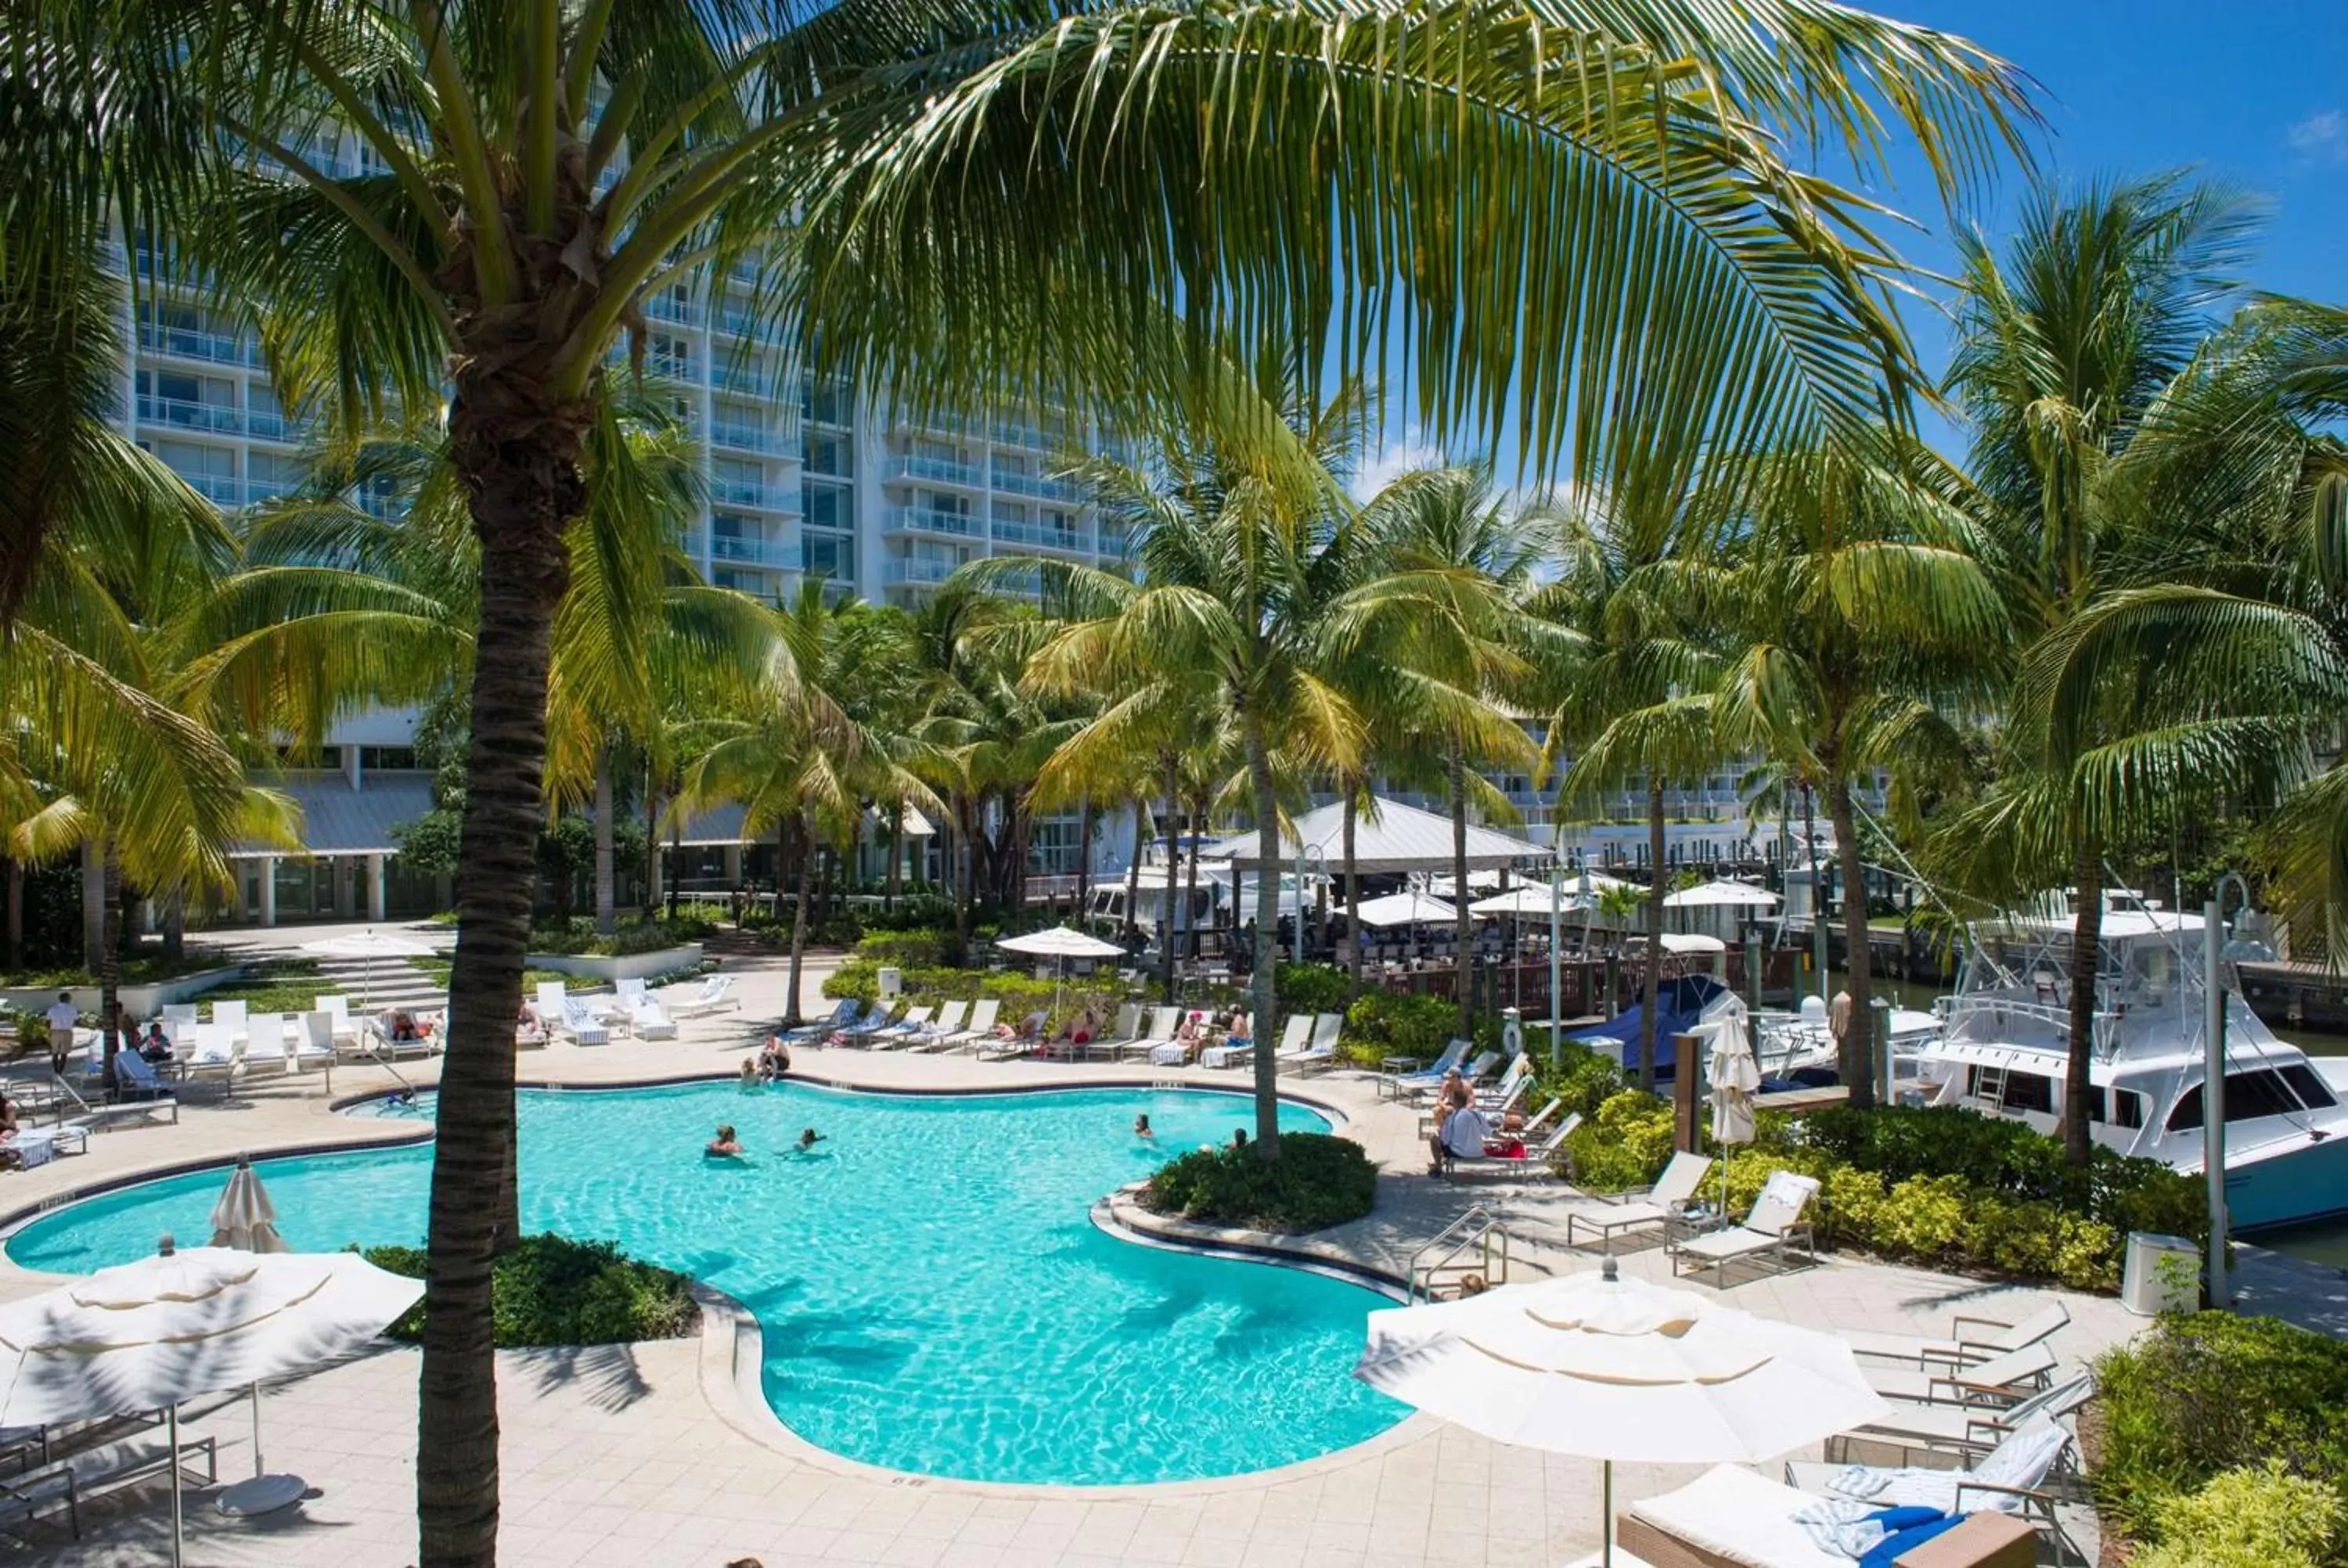 Pool View in Hilton Fort Lauderdale Marina